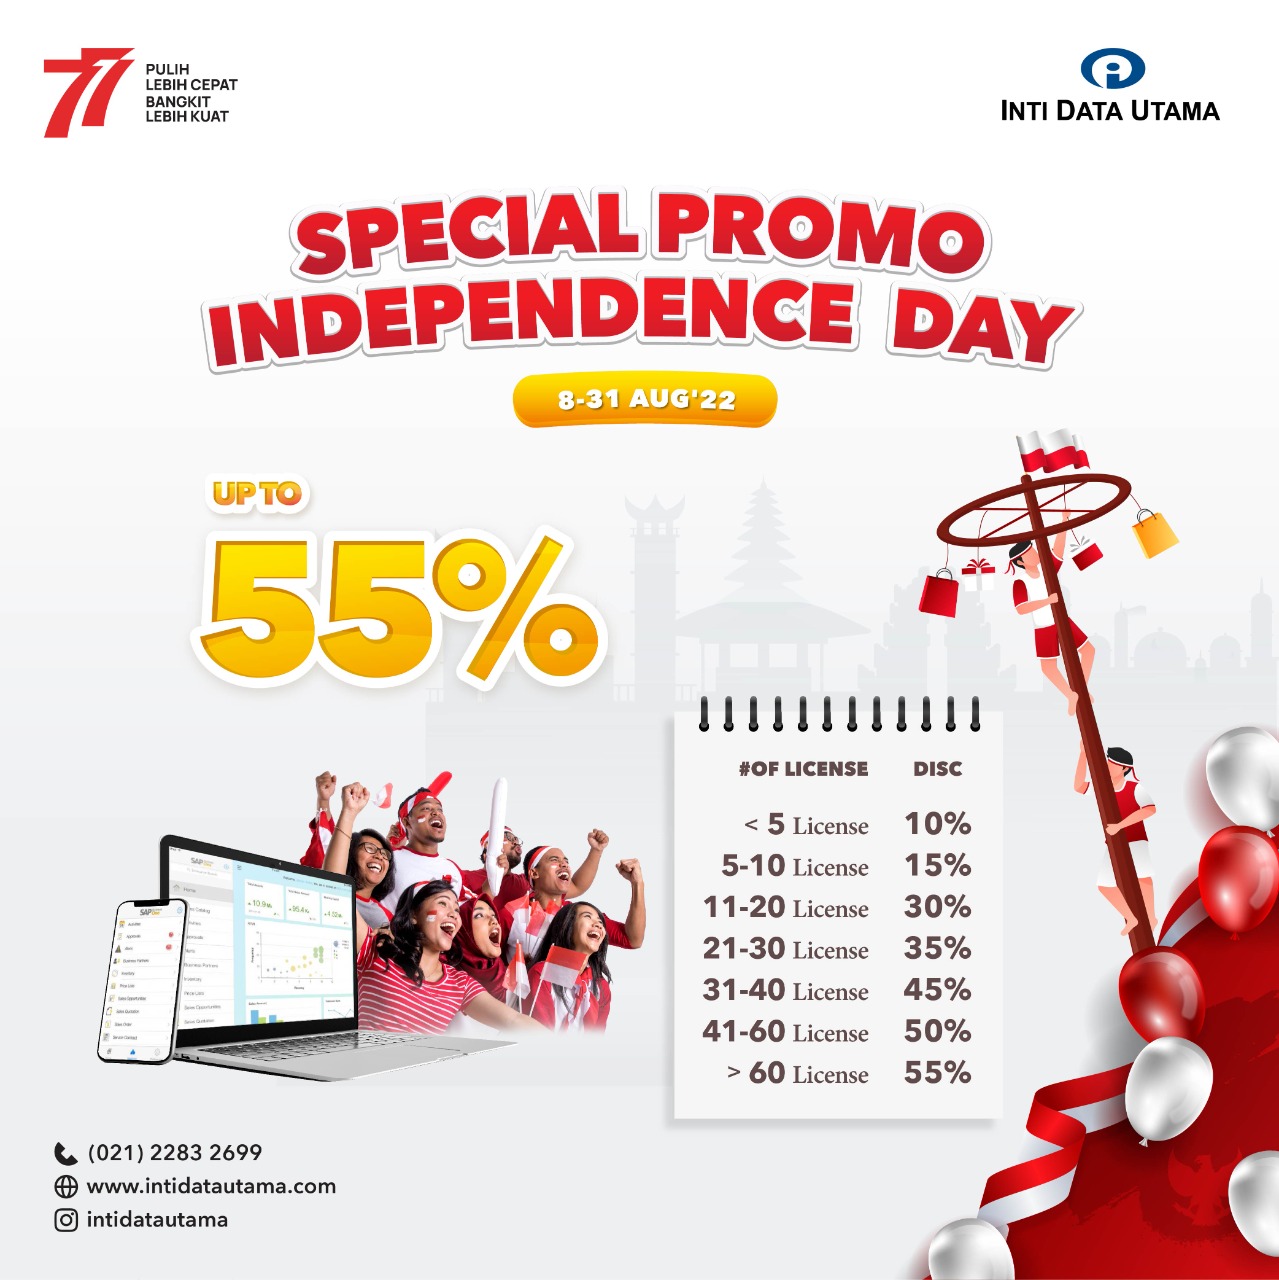 Indonesia 77 SAP B1 Promo – Special Discount Additional License up to 55%